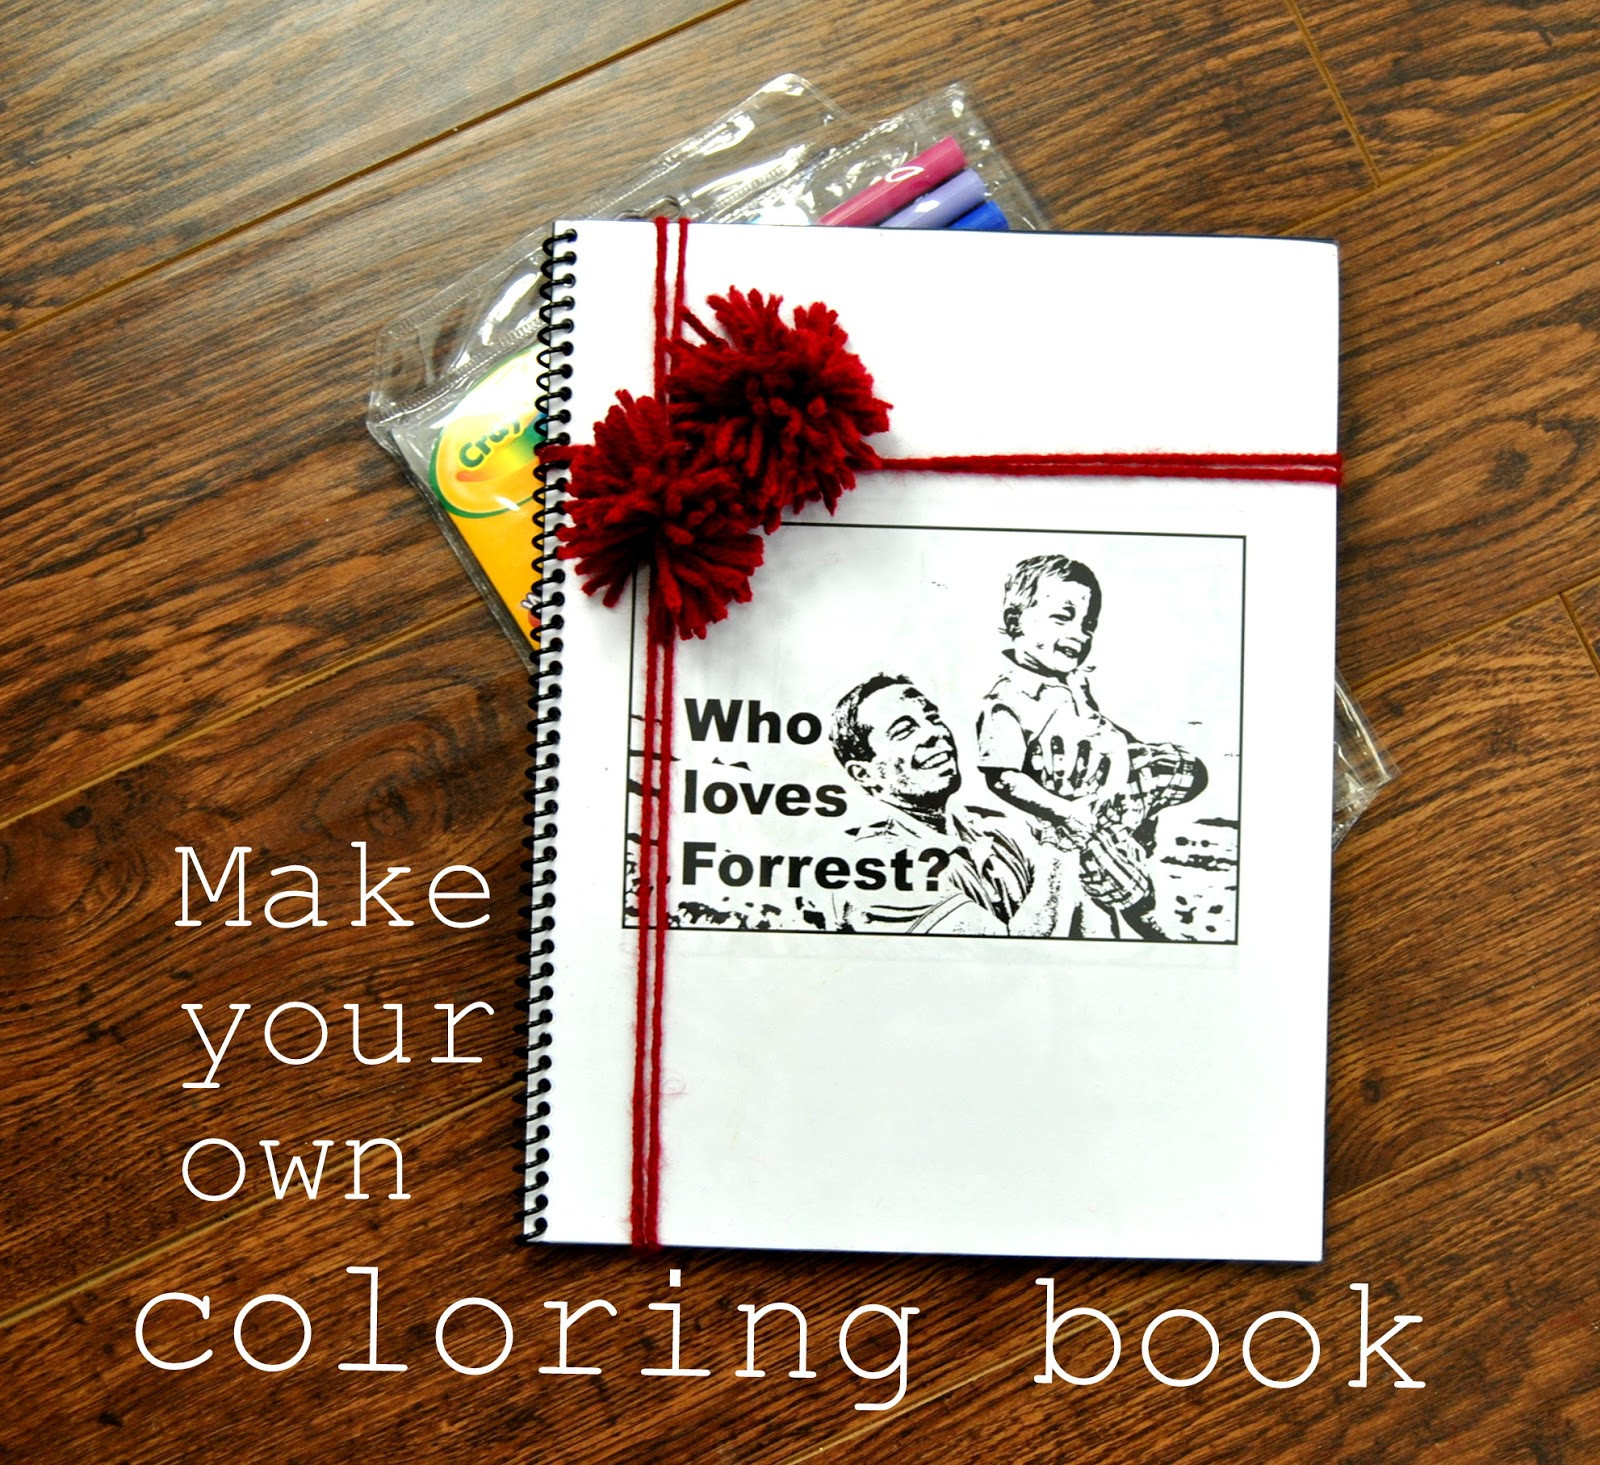 Print Your Own Coloring Book
 EAT SLEEP MAKE SYS Make Your Own Coloring Book Rachel